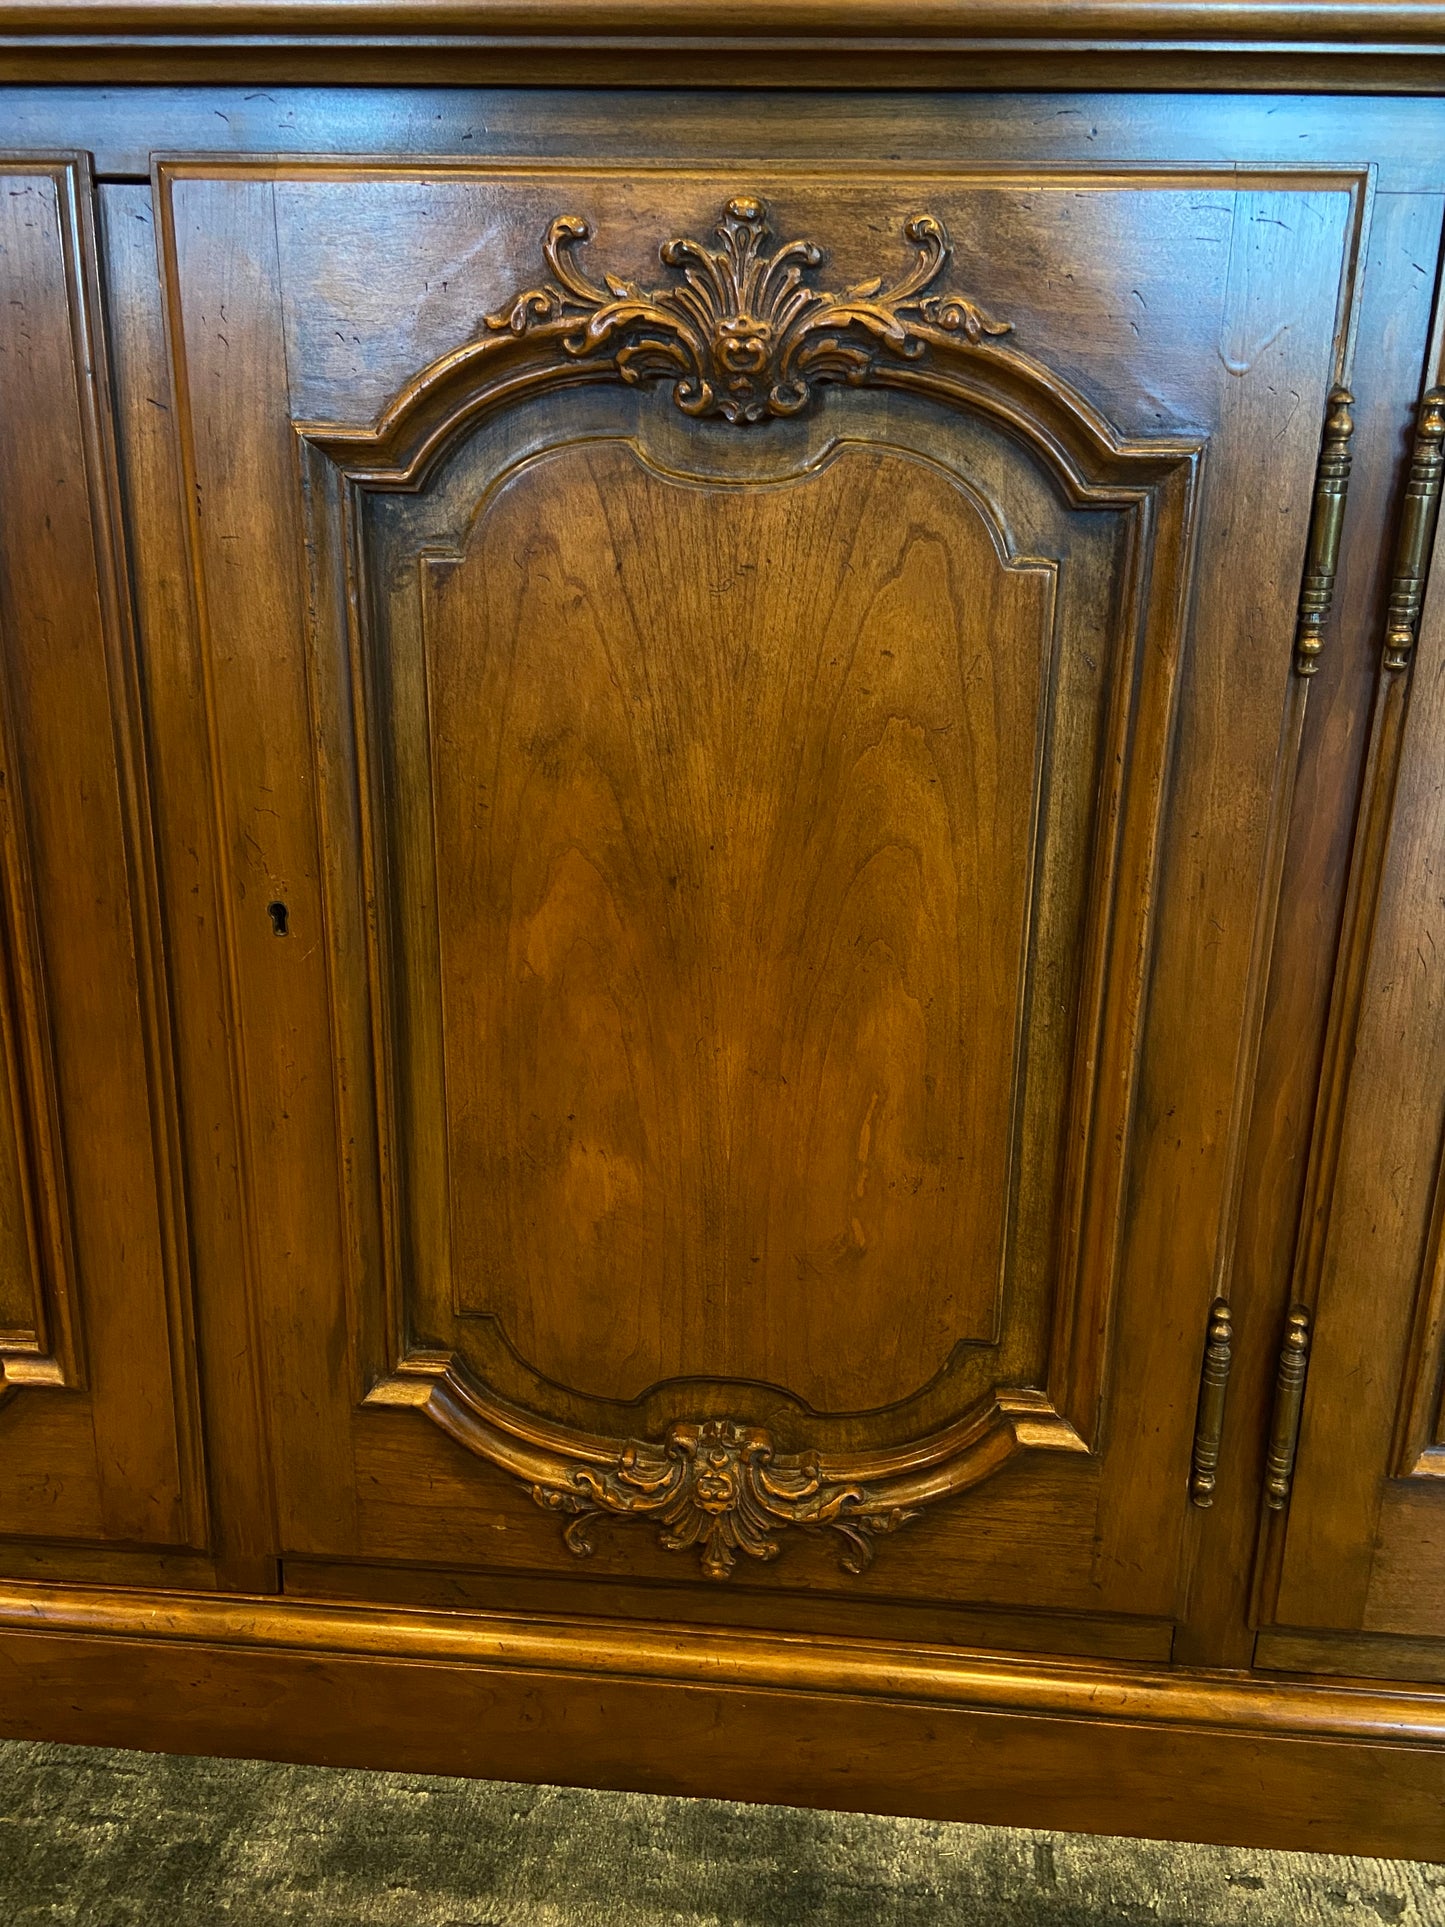 French Provincial Buffet (27465)